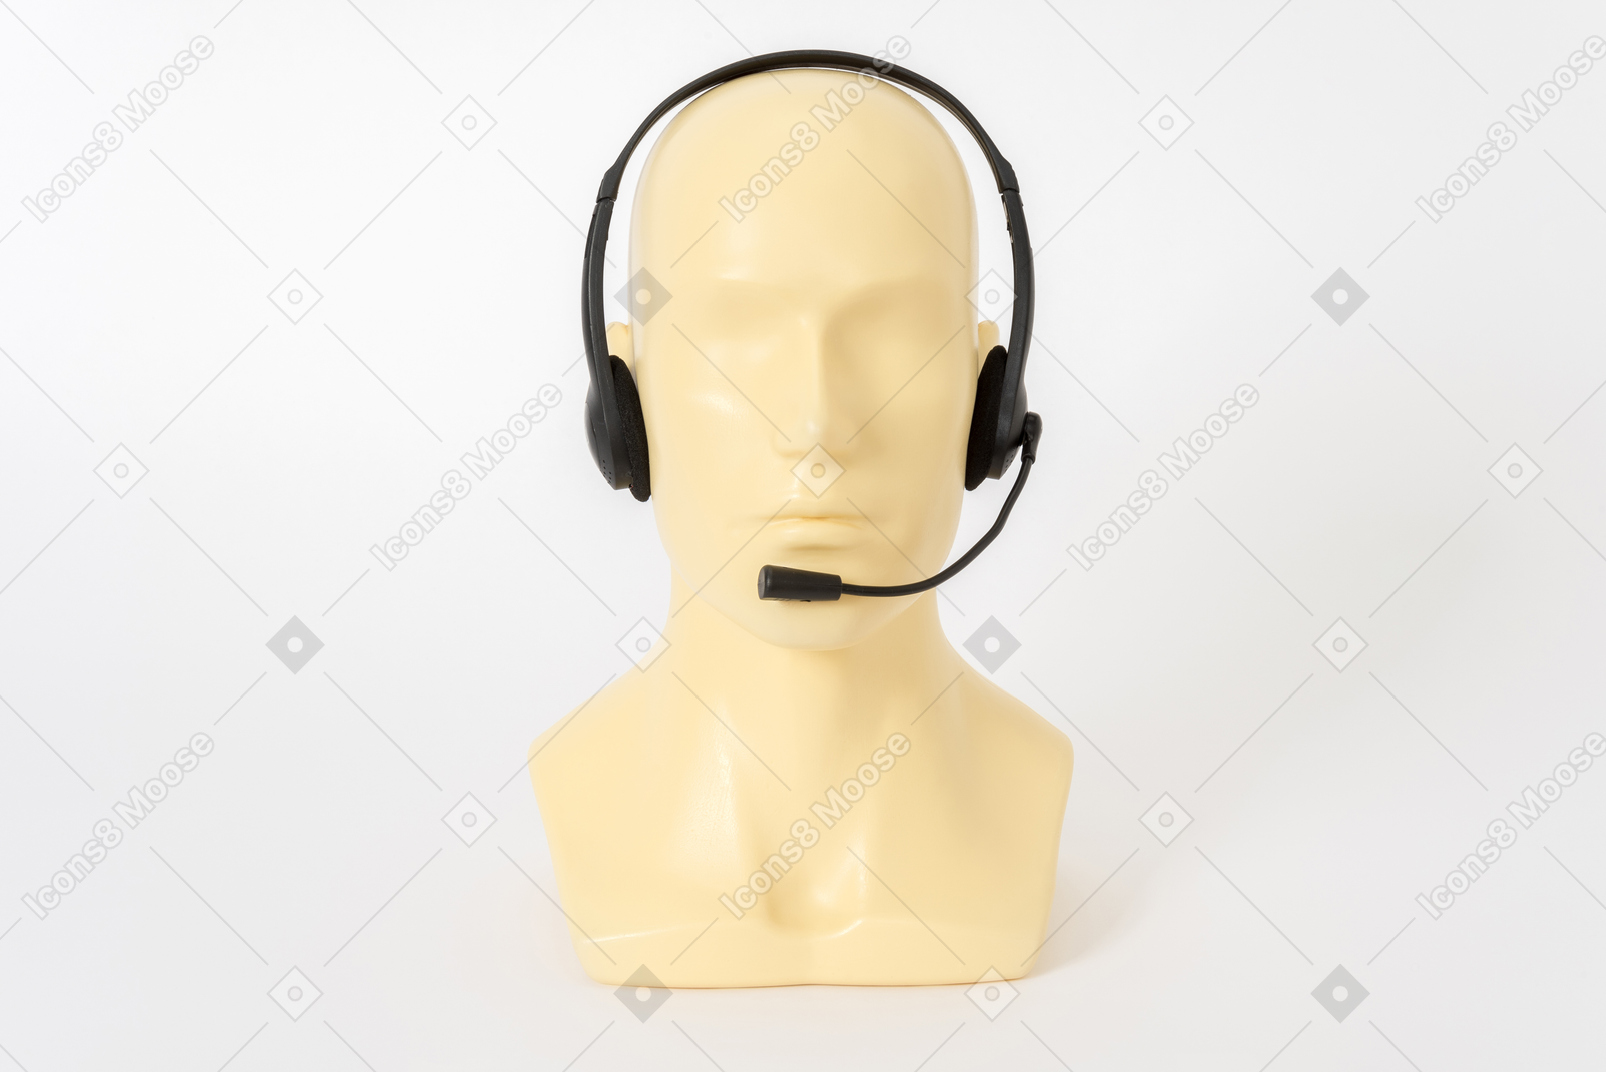 Call center headset on mannequin head